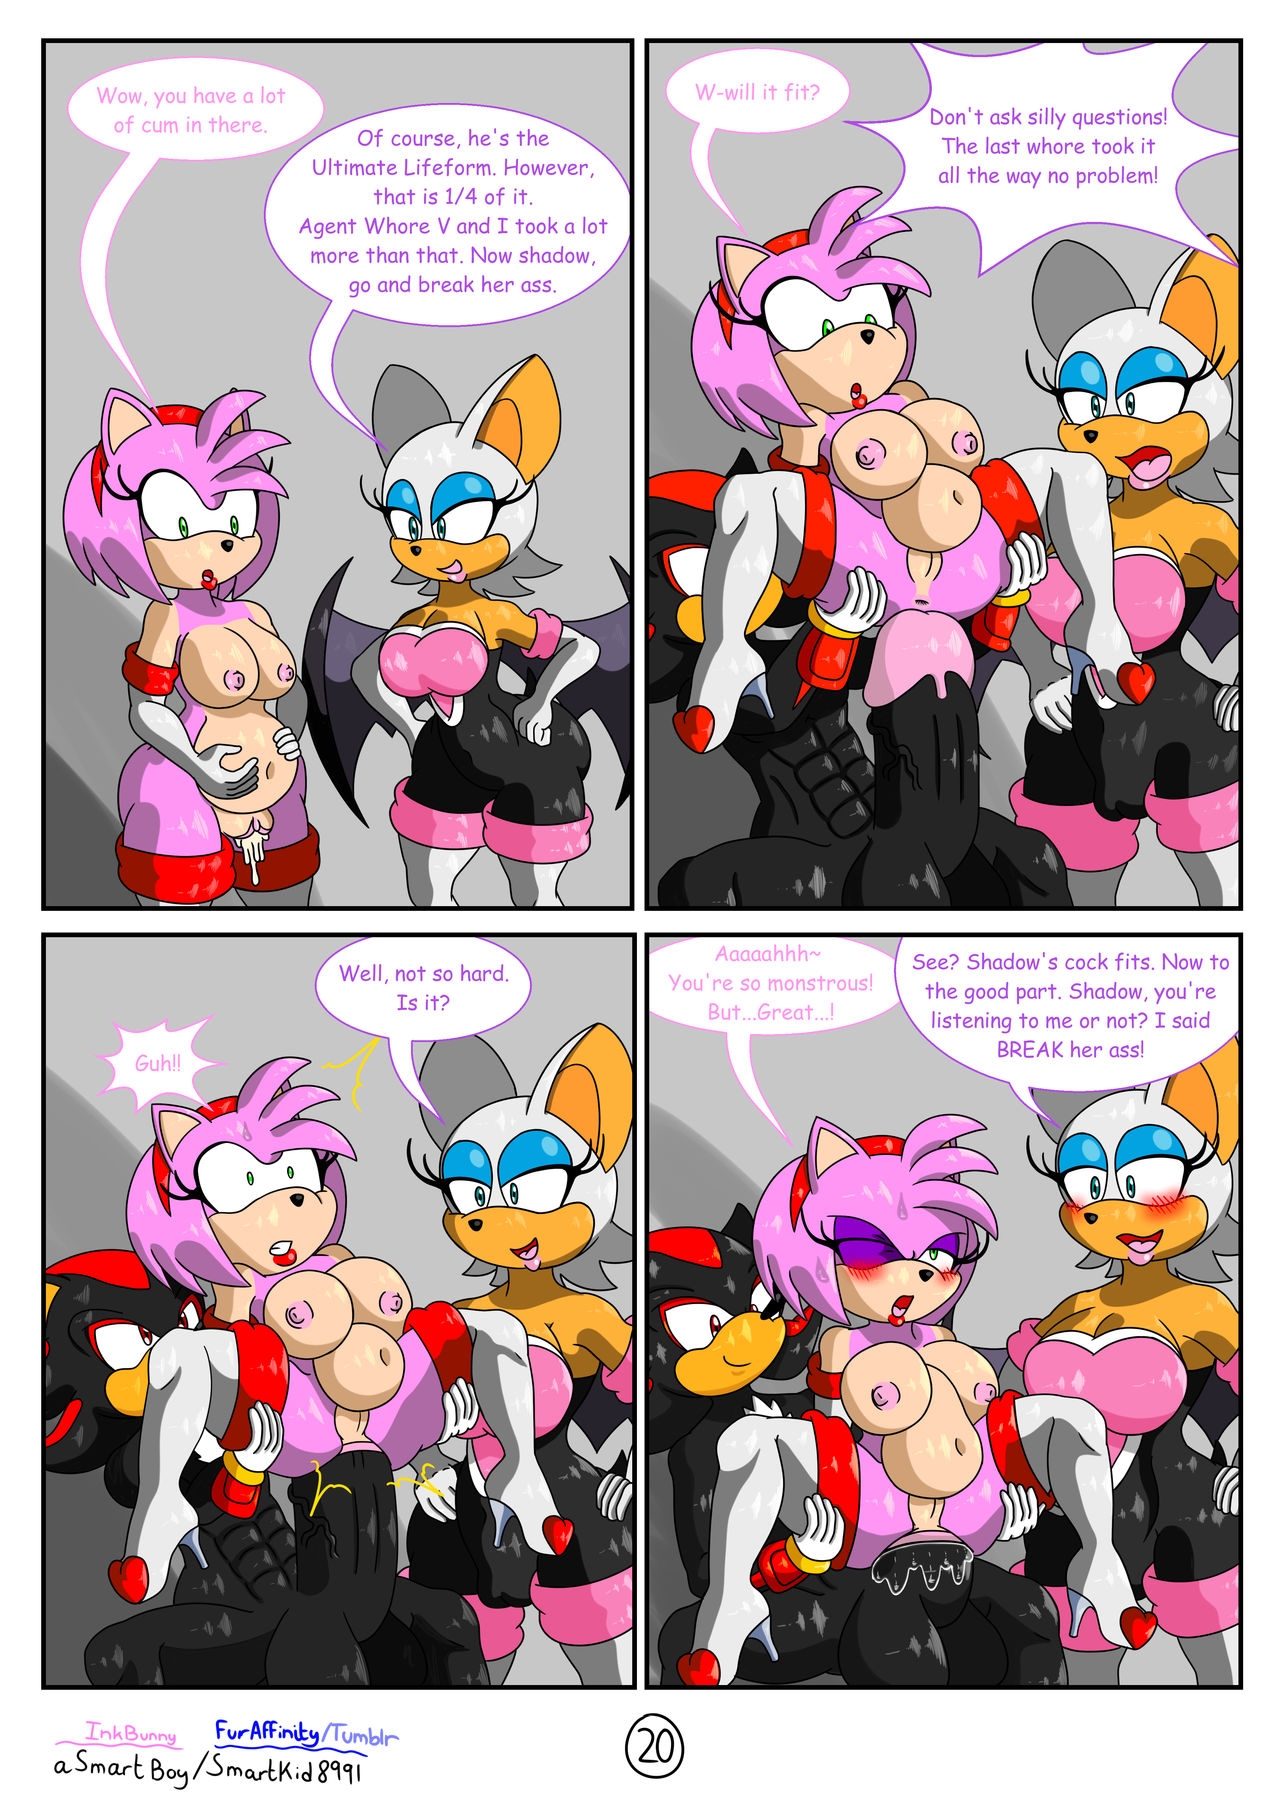 [SmartKid8991] Agent Whore Bootcamp (Sonic The Hedgehog) [Ongoing] 20